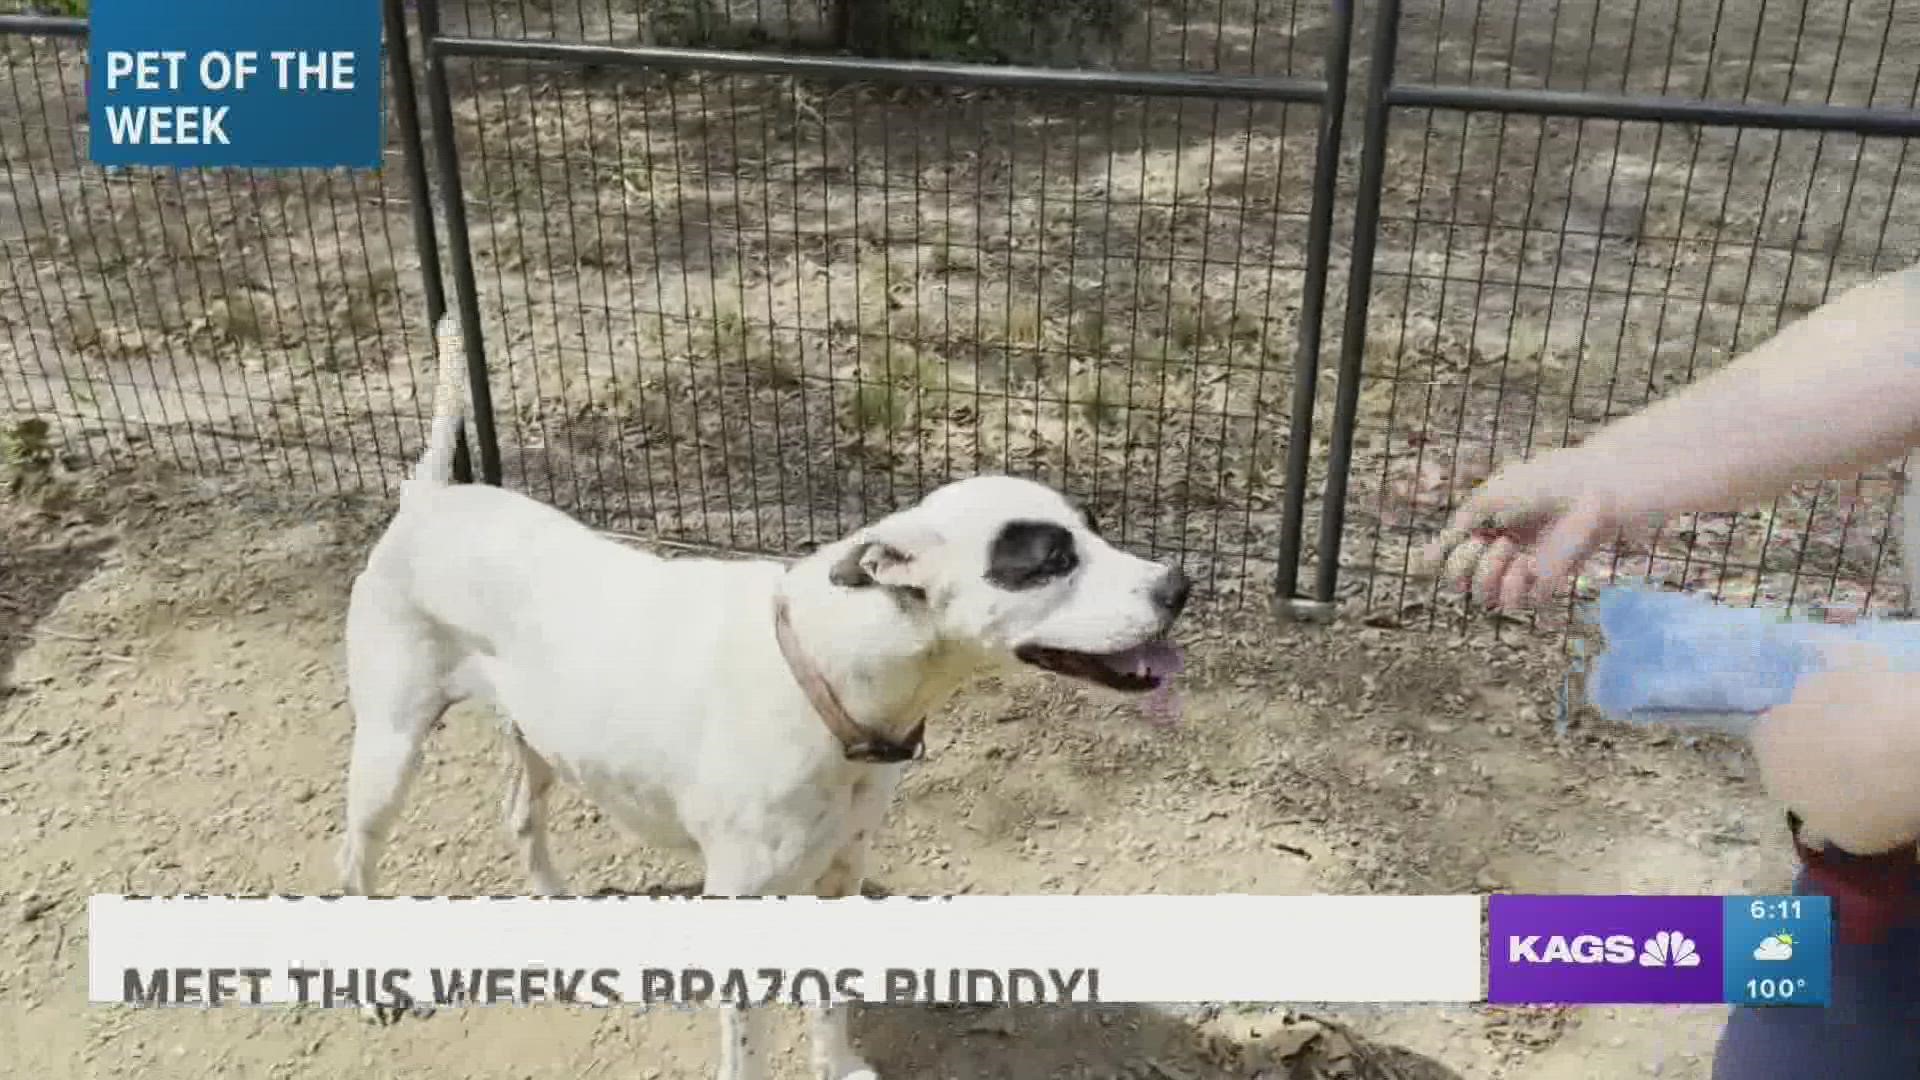 This week's featured Brazos Buddy features Doug, a five-year-old large breed mix that's looking for his forever home.